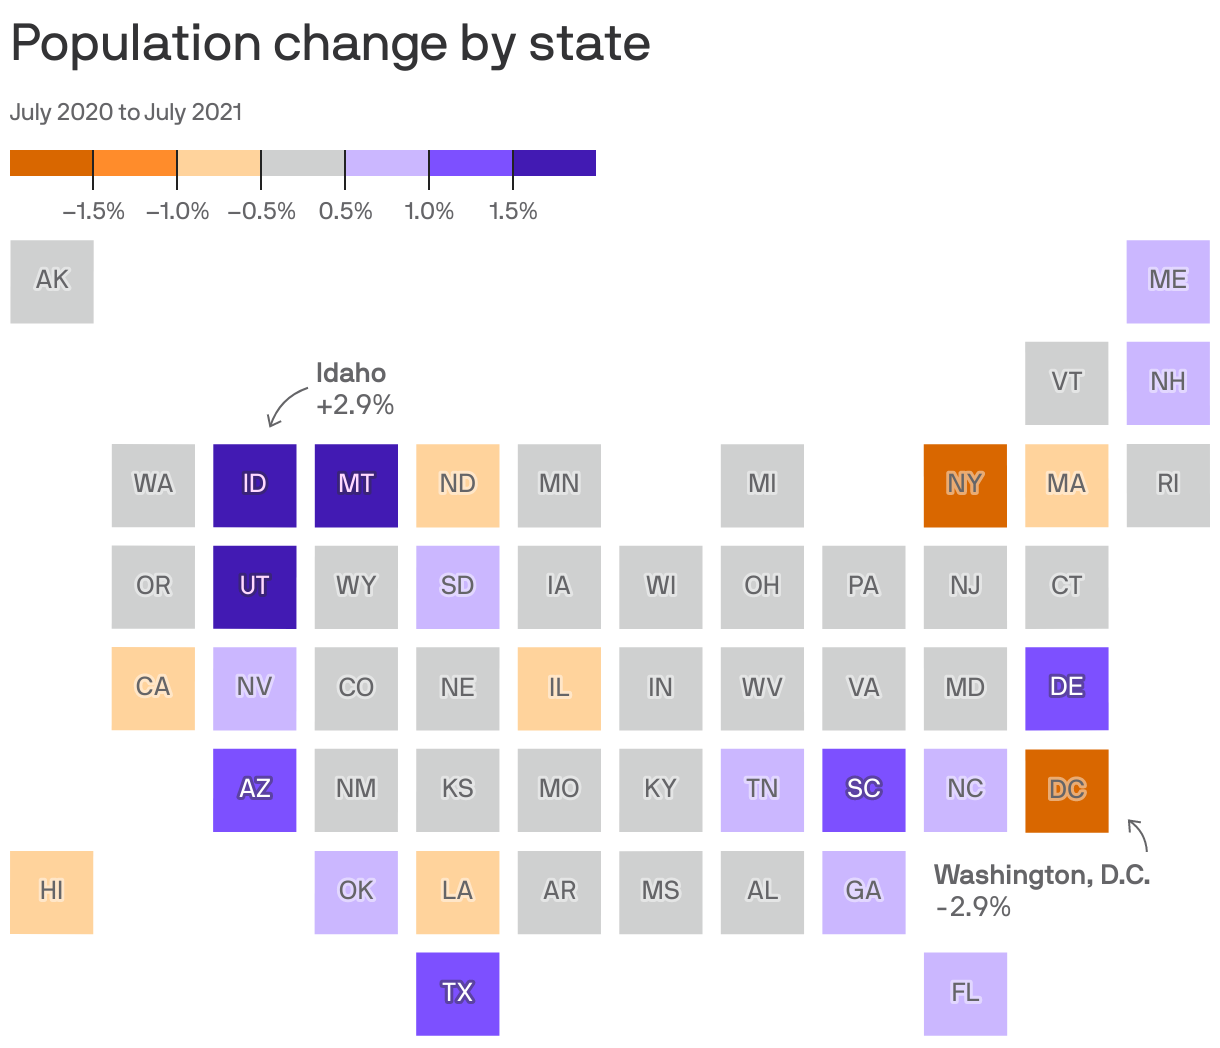 Population change by state